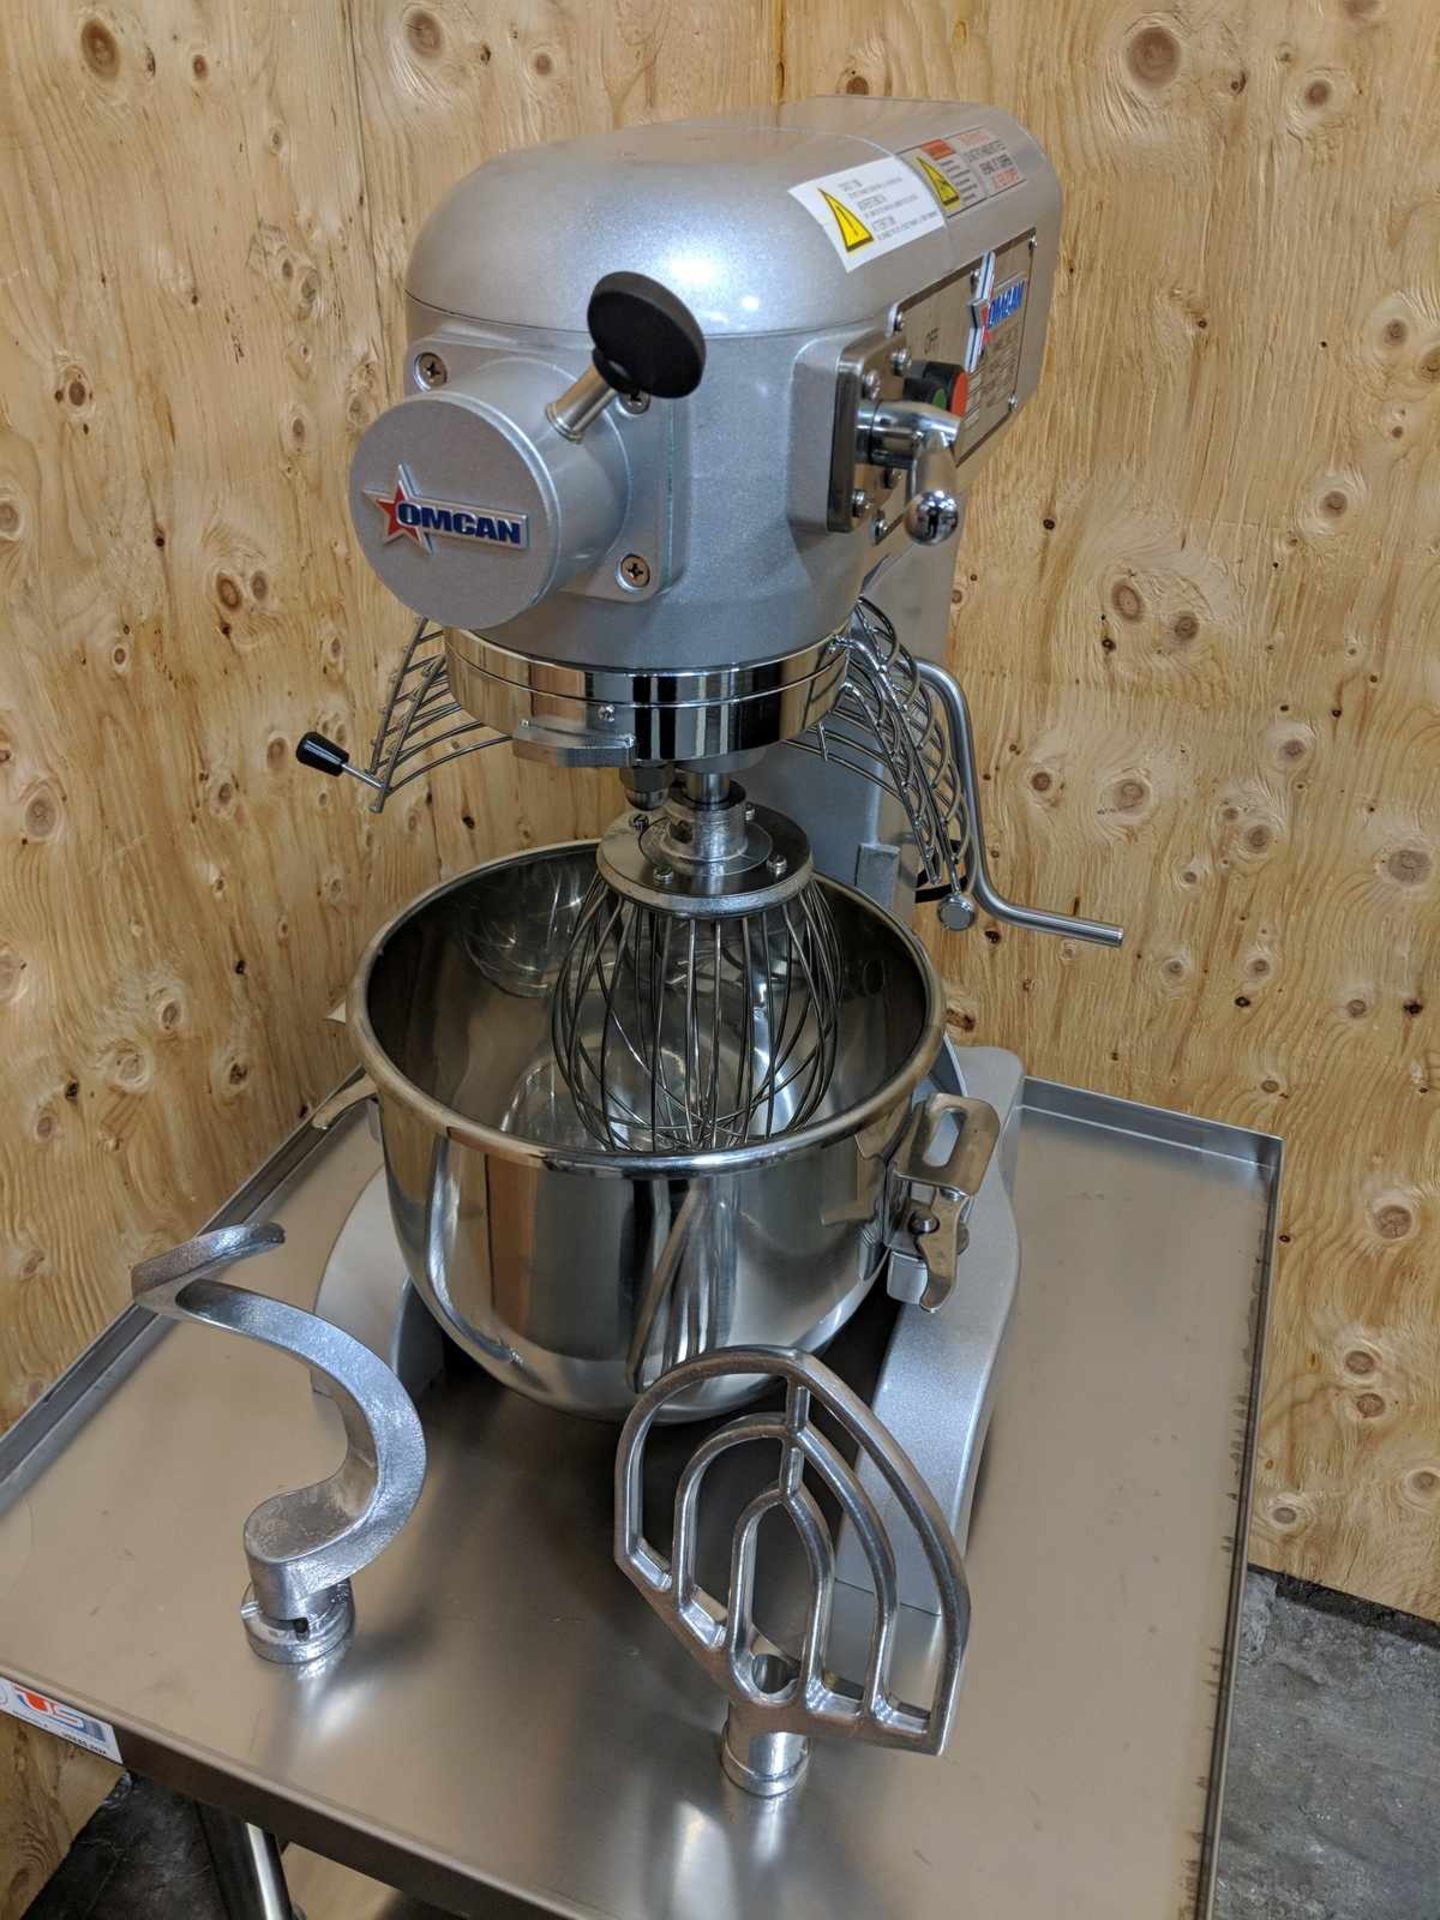 10qt Planetary Mixer with Guard and Attachments - Image 3 of 4